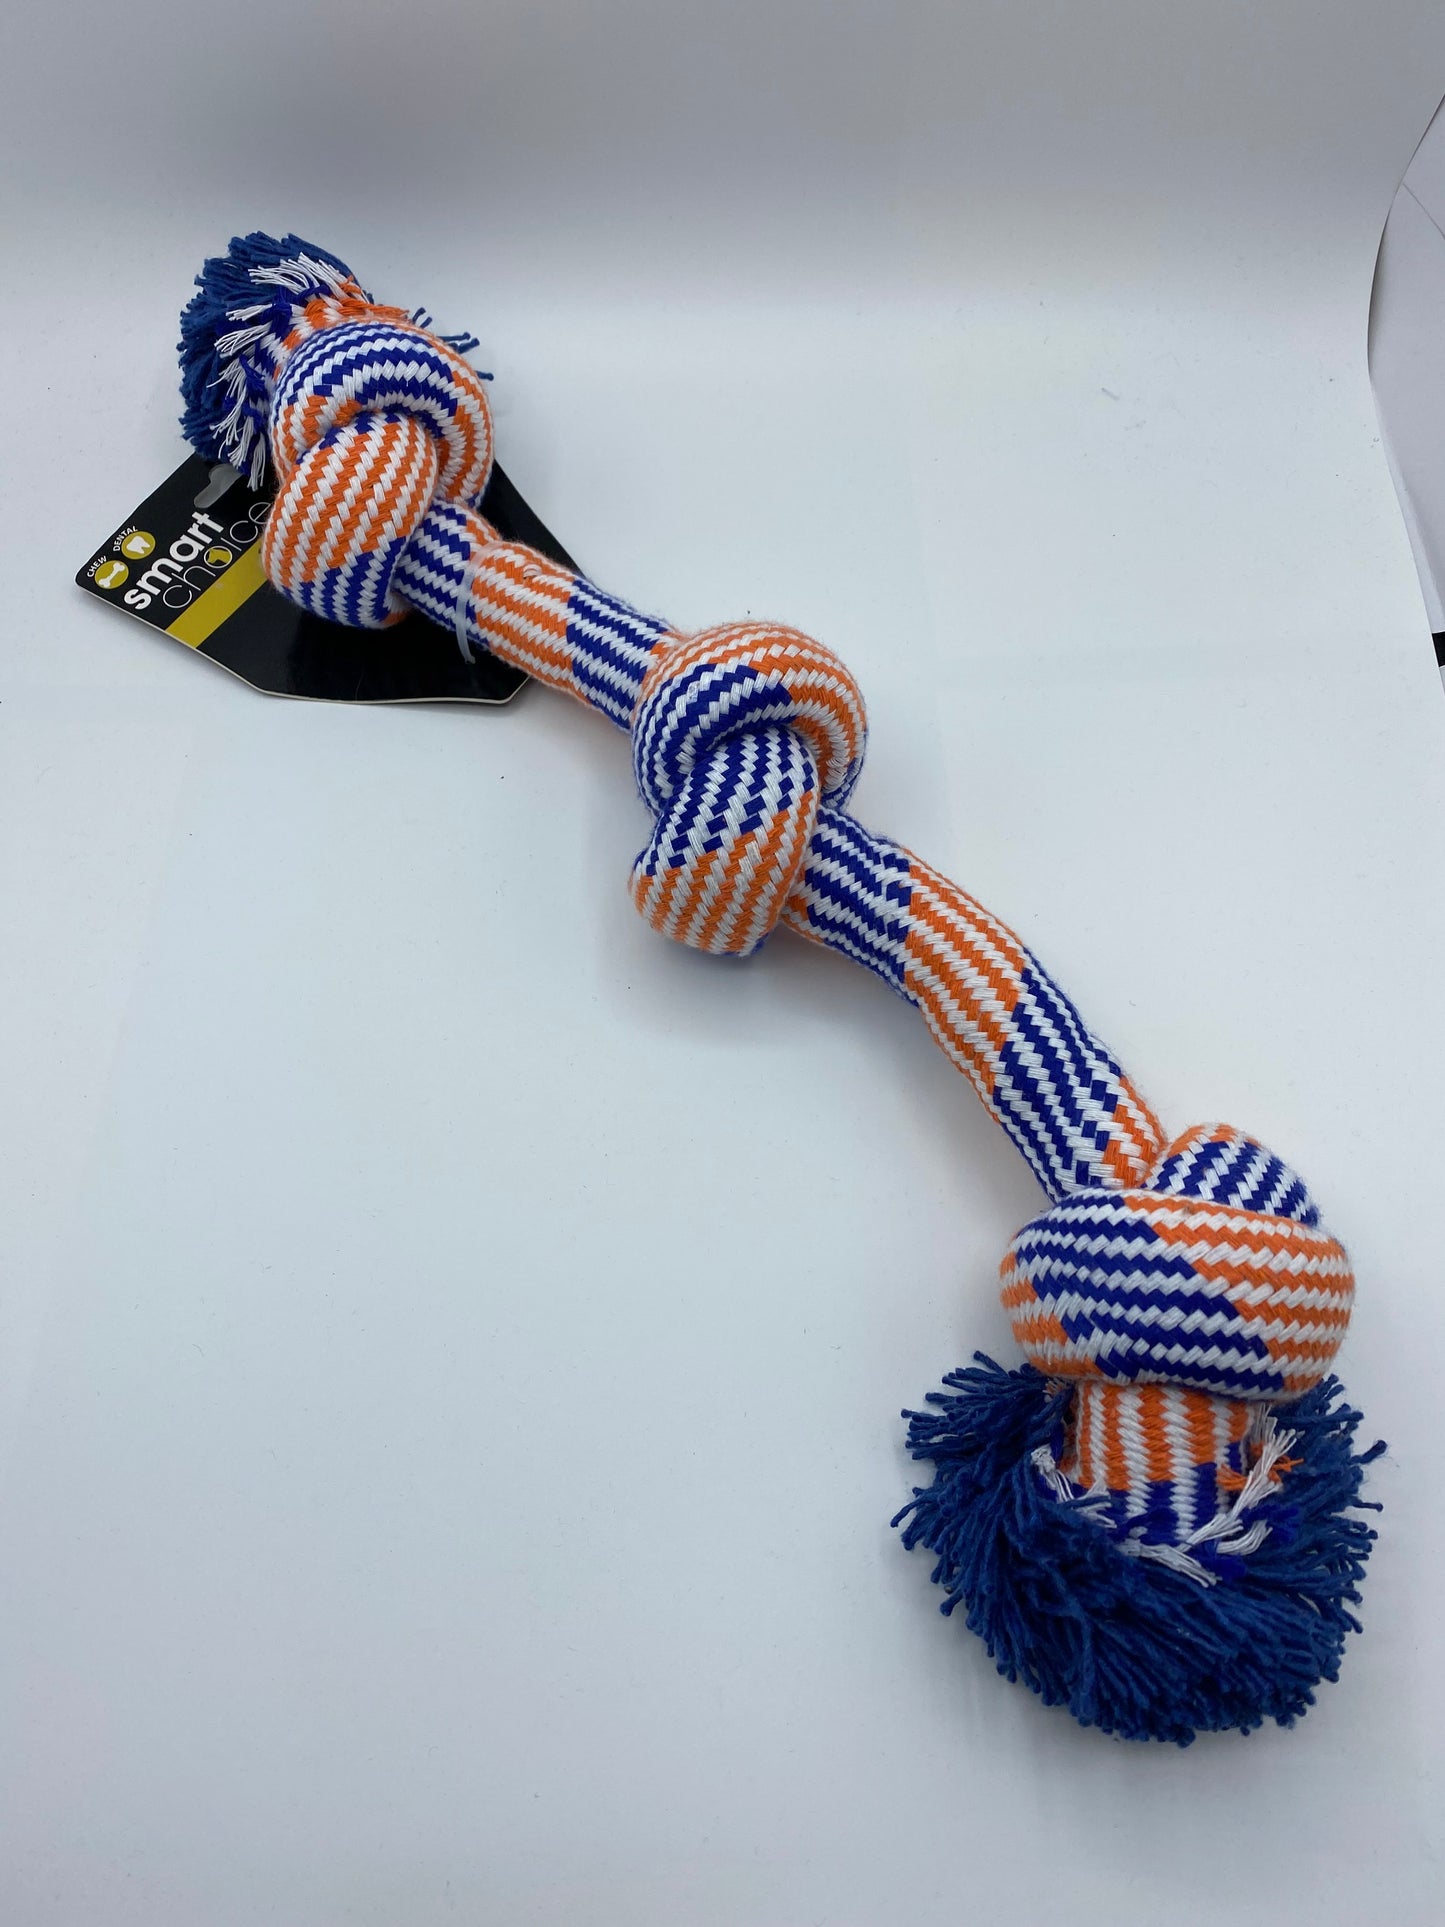 XL Rope Tug Dog Toy Triple Knot Approx size 50cm long